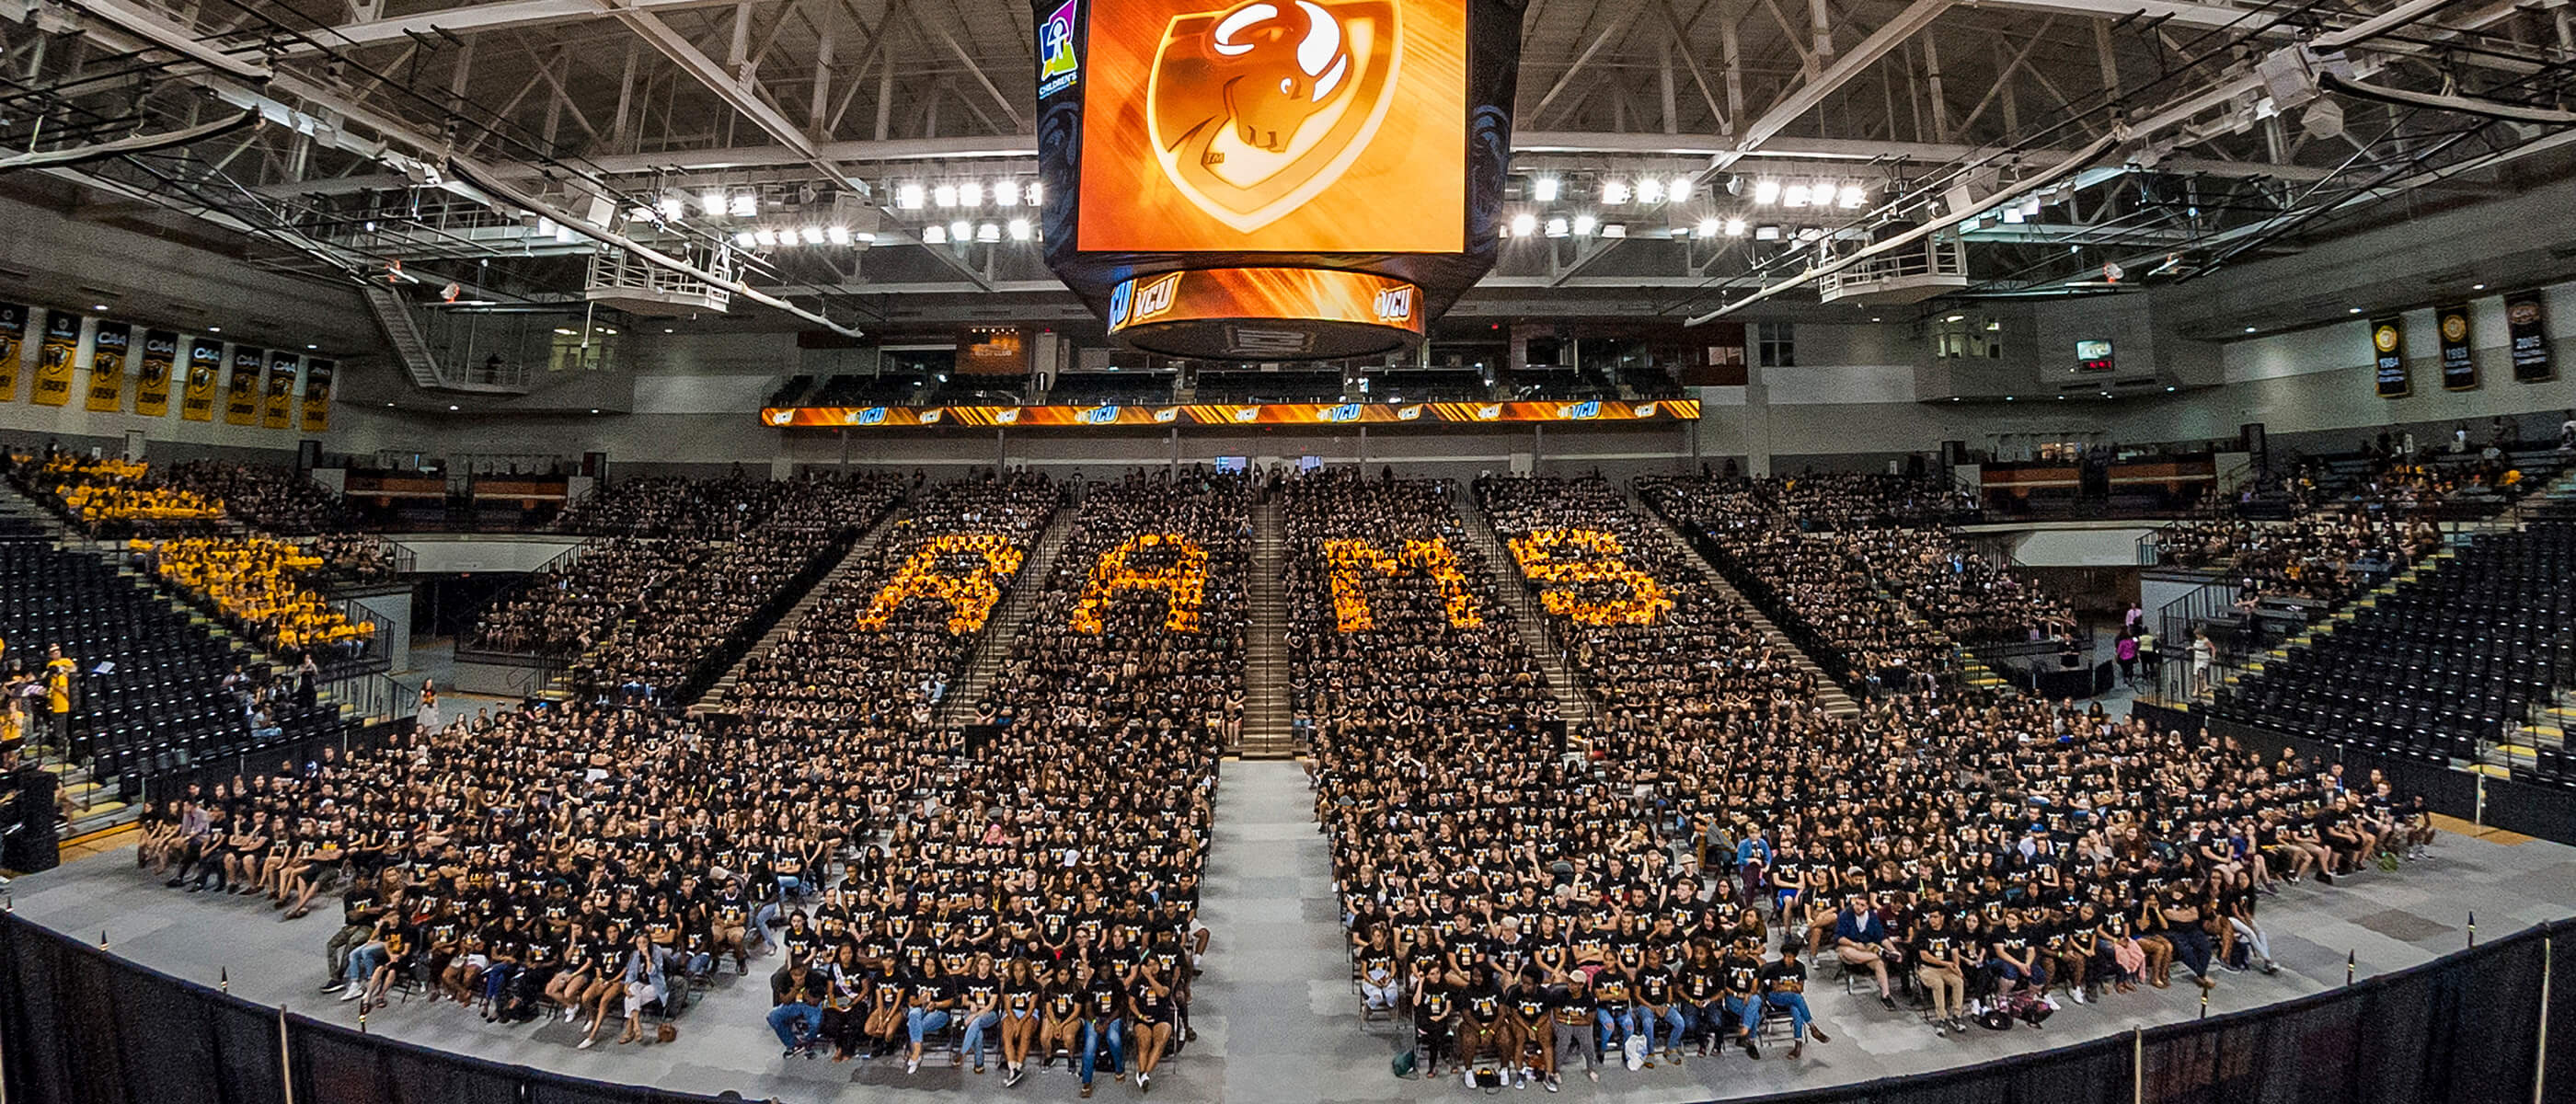 Students gather in a large arena for convocation